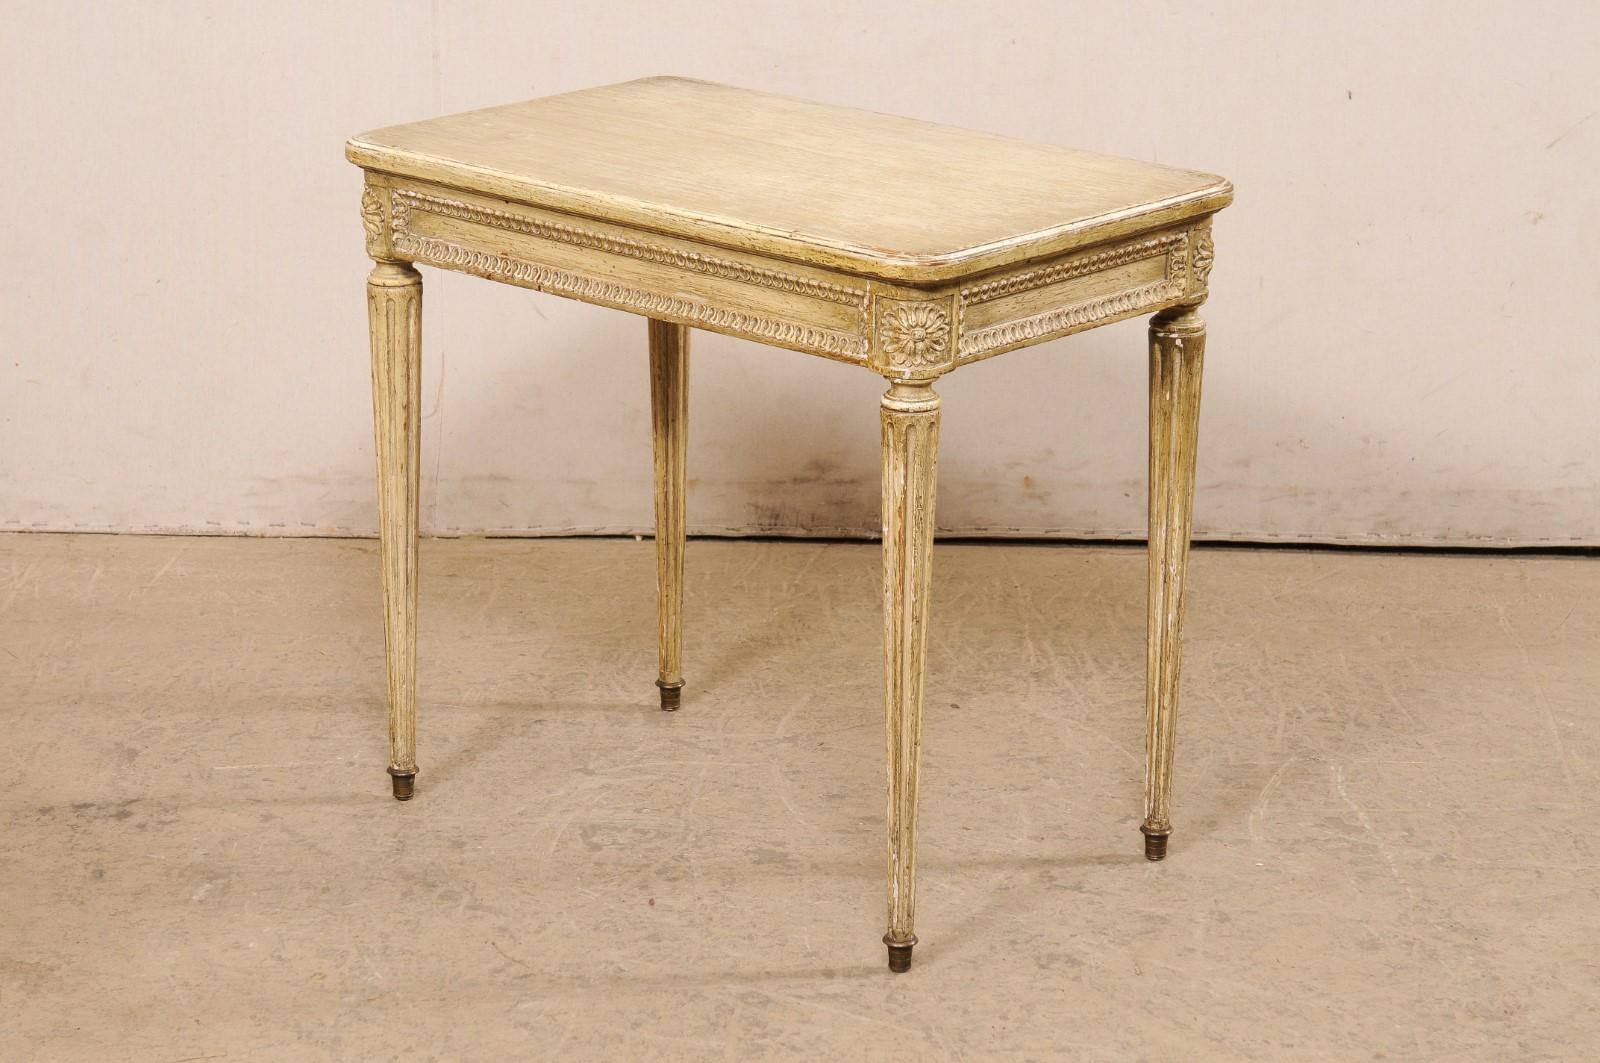 Louis XVI Style French Side Table with its Original Painted Finish Early 20th C. For Sale 2